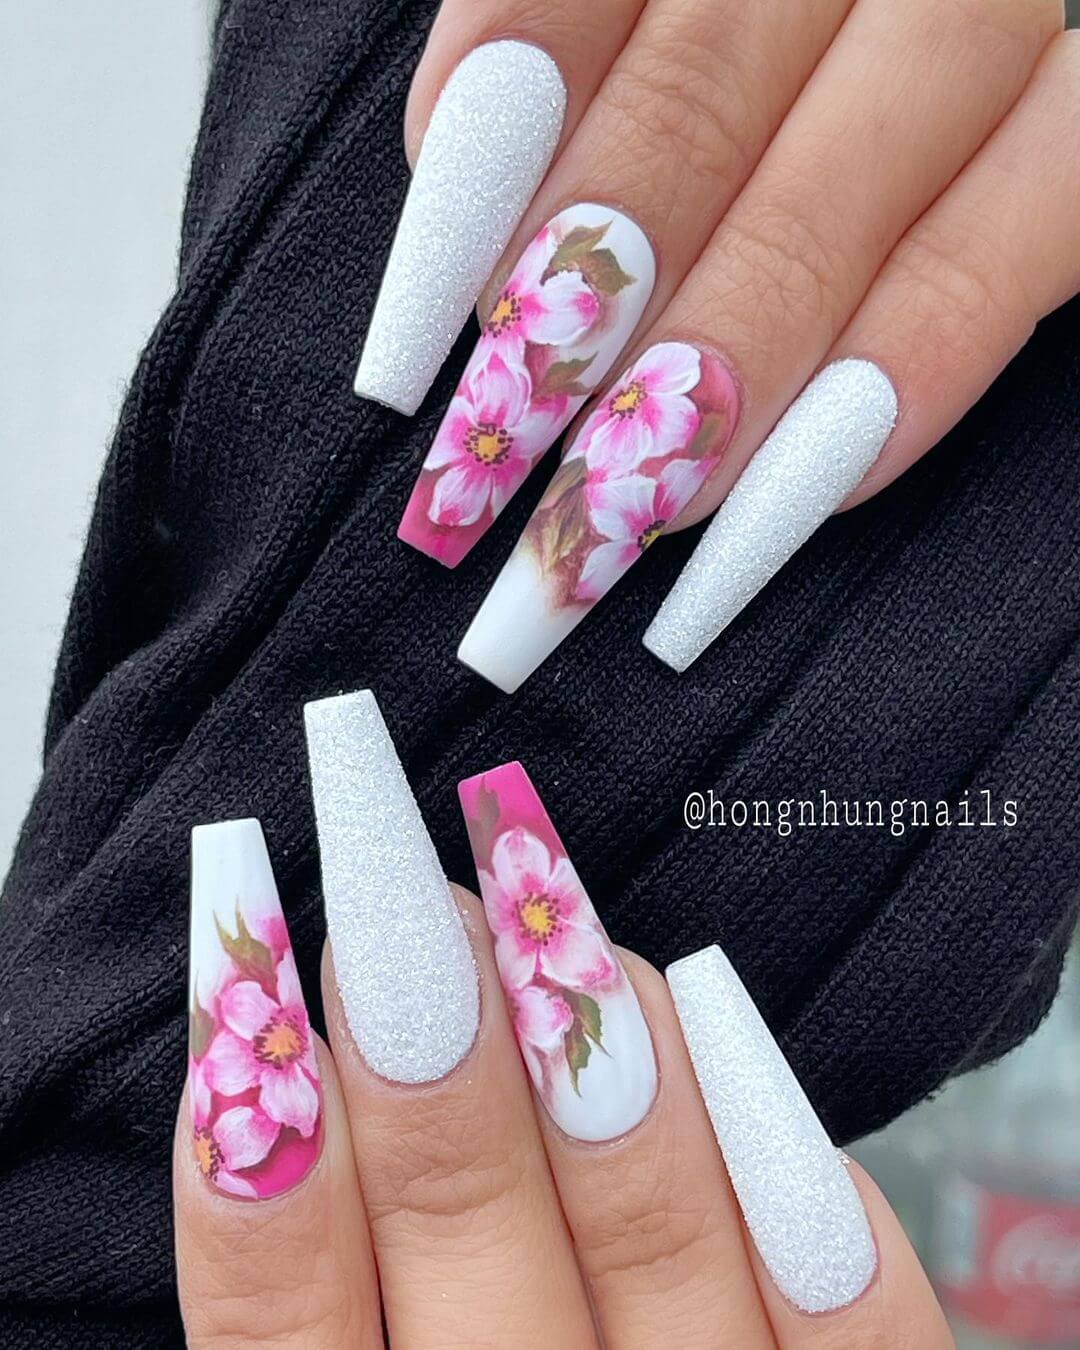 Roses in pink and silver nail art design